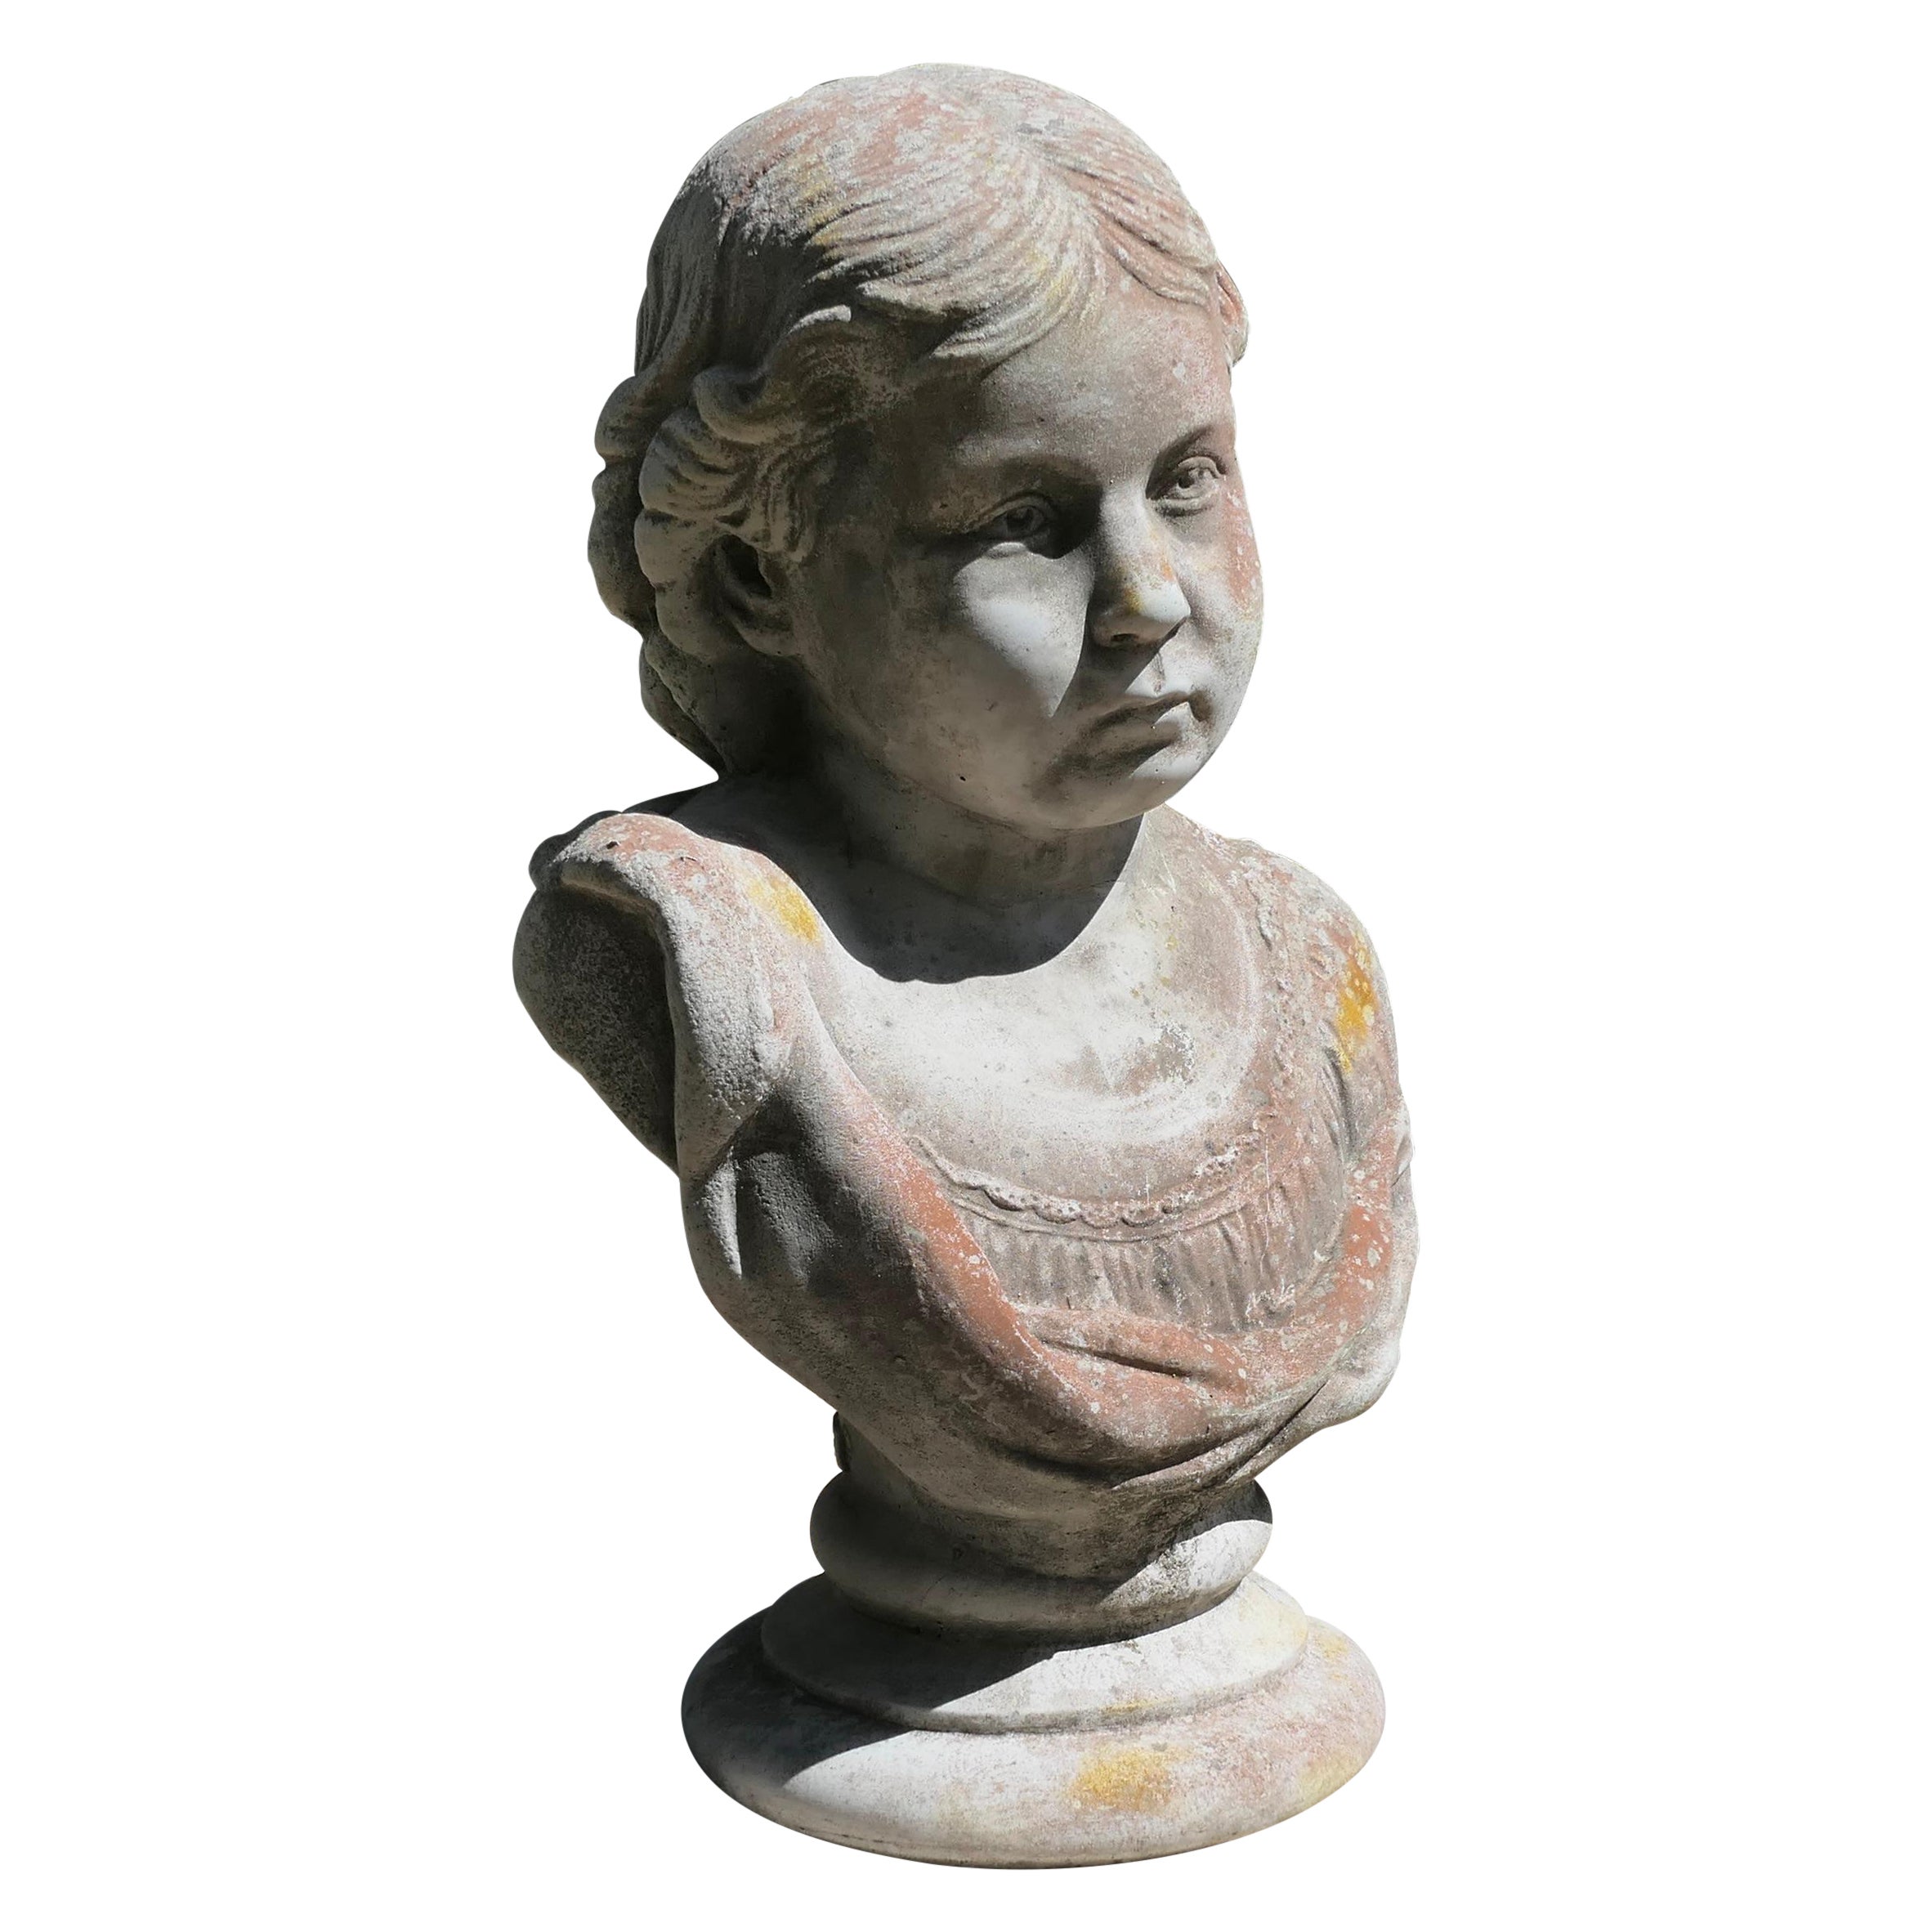  Head and Shoulder Bust of a Young Girl Garden Statue   For Sale